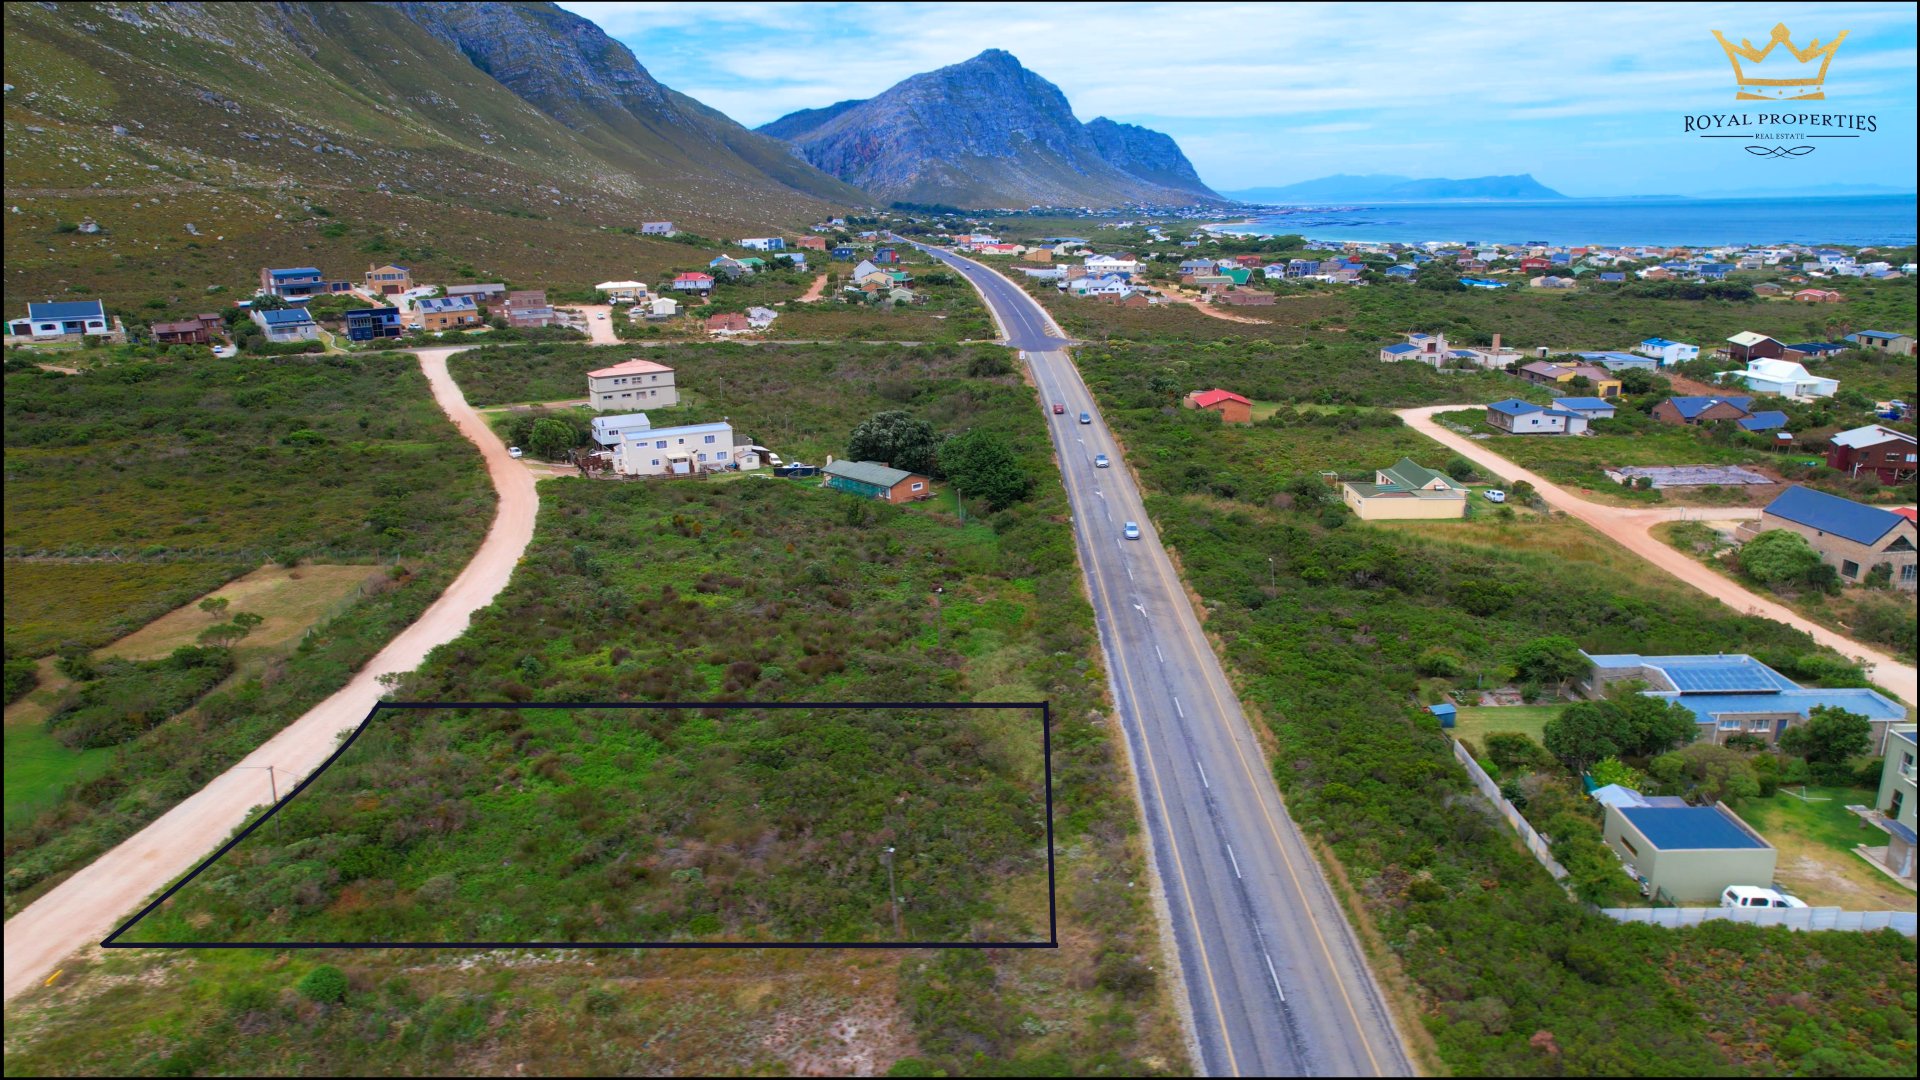  Bedroom Property for Sale in Bettys Bay Western Cape